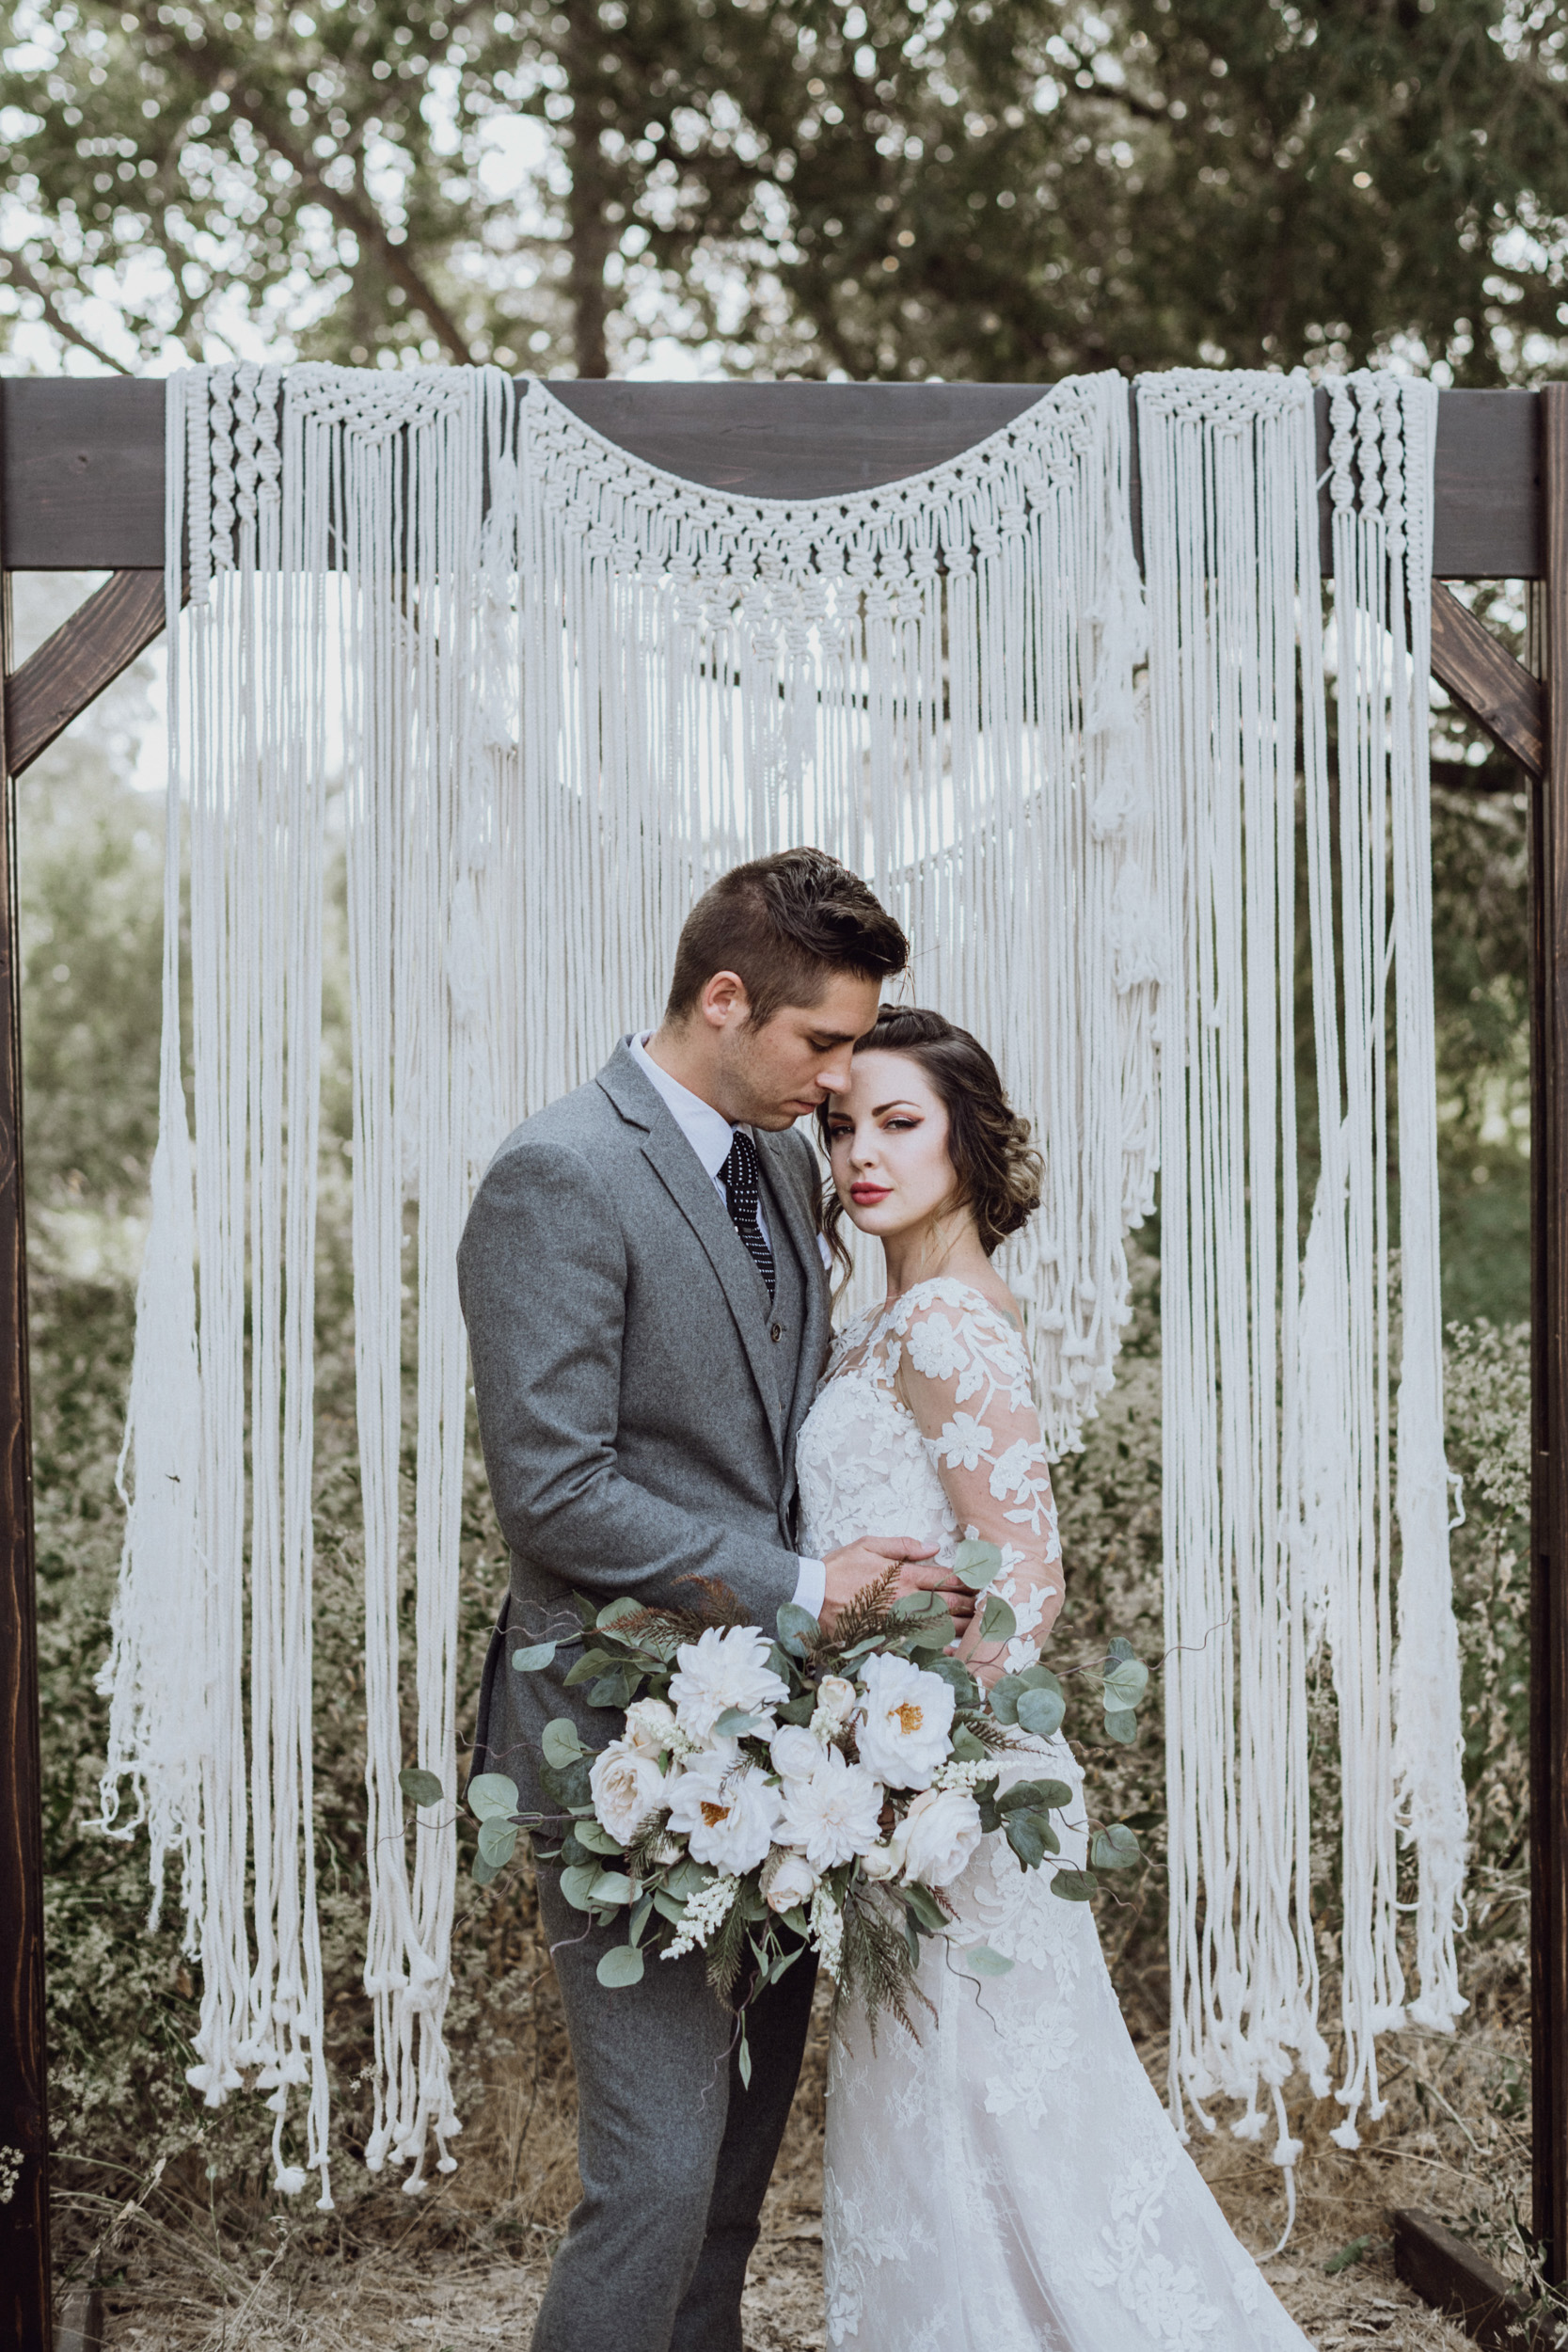 Groom holding bride in front of Macrame 